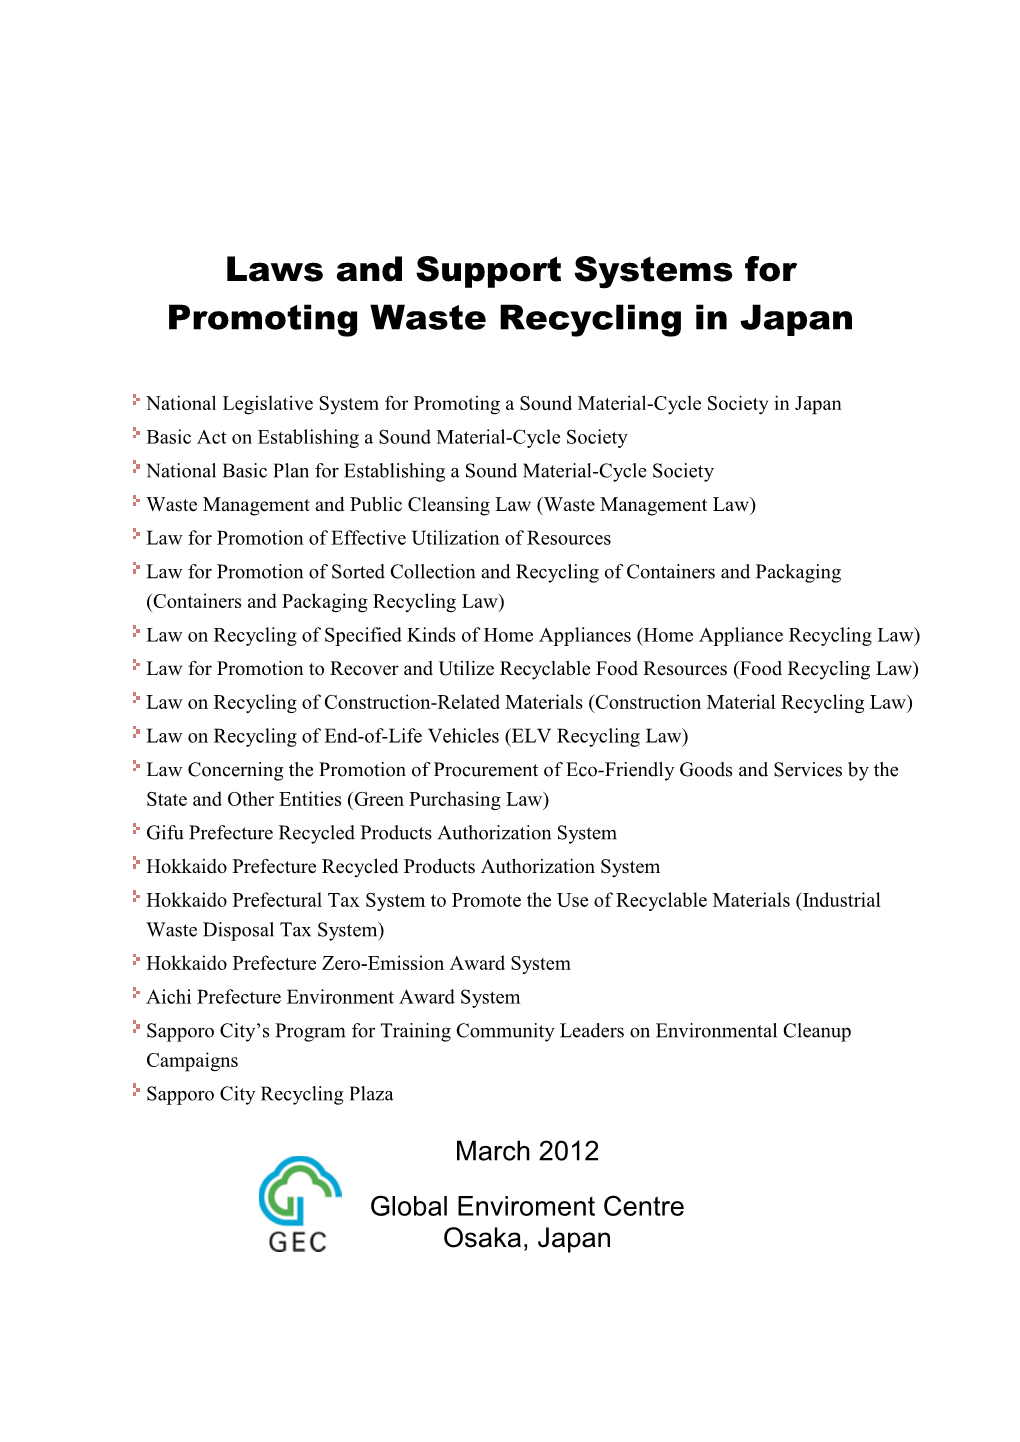 Laws and Support Systems for Promoting Waste Recycling in Japan